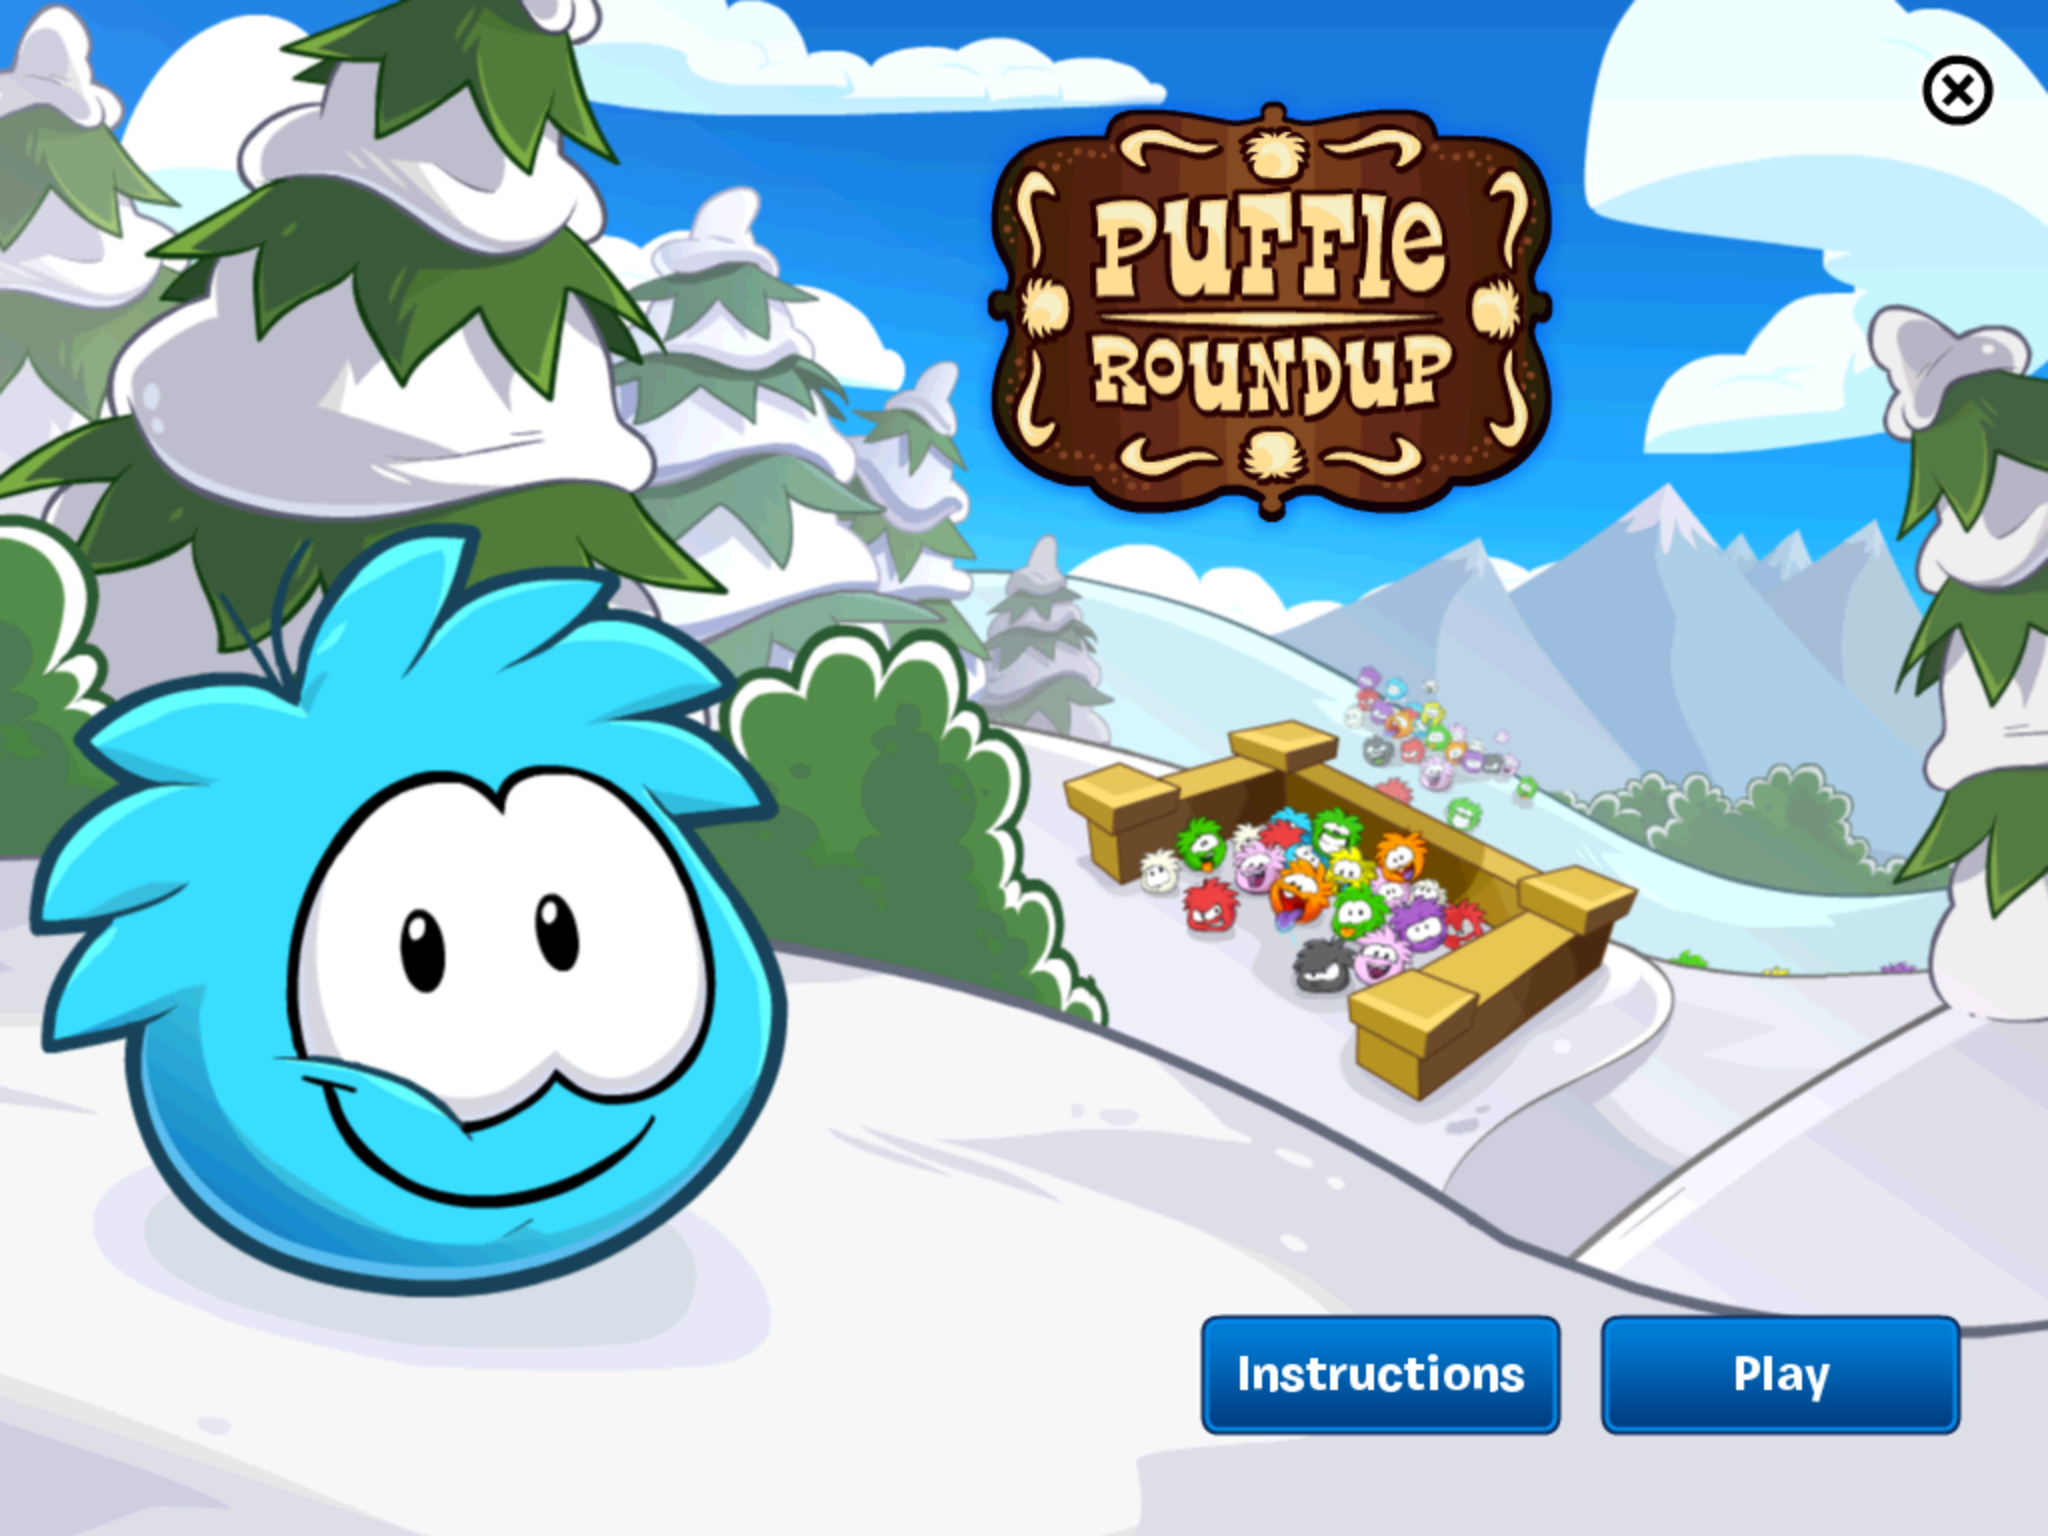 Club Penguin Puffle Round Up title